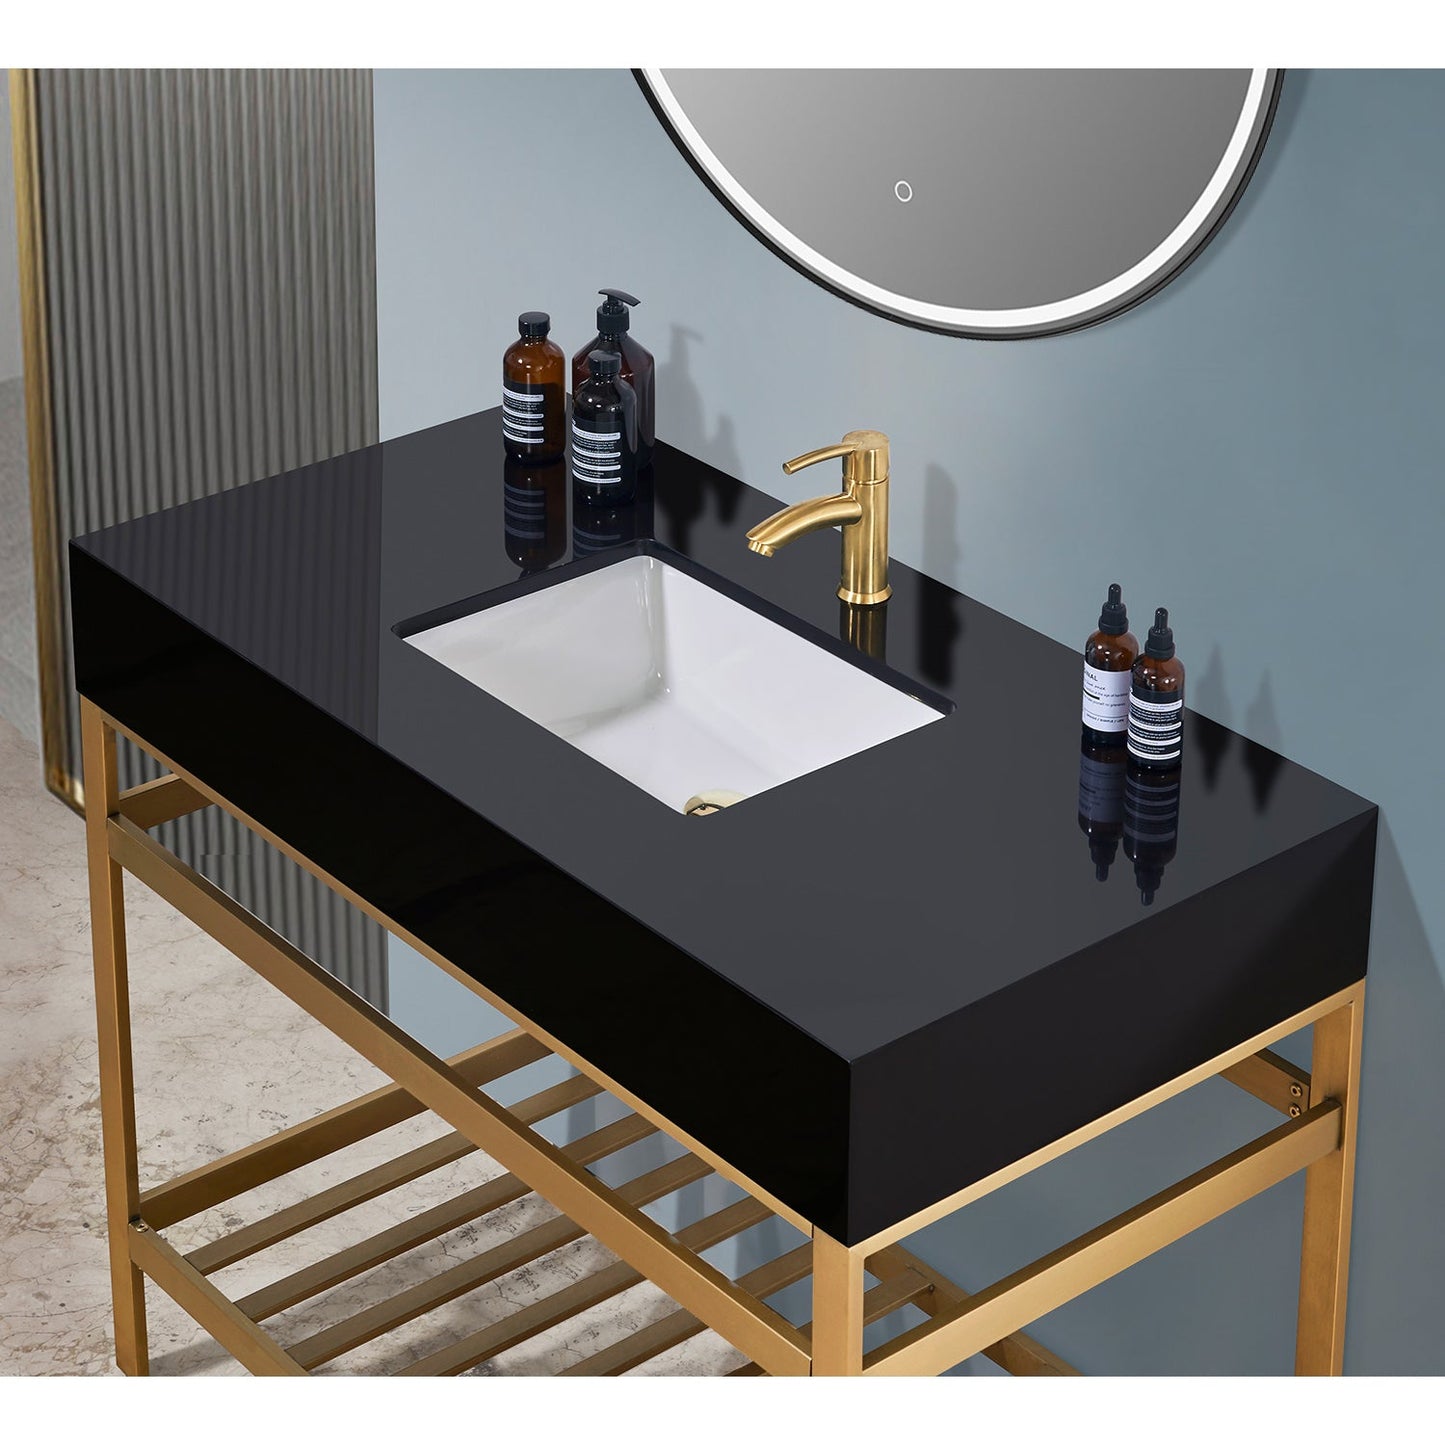 Nauders 42" Single Stainless Steel Vanity Console in Brushed Gold with Imperial Black Stone Countertop and Mirror